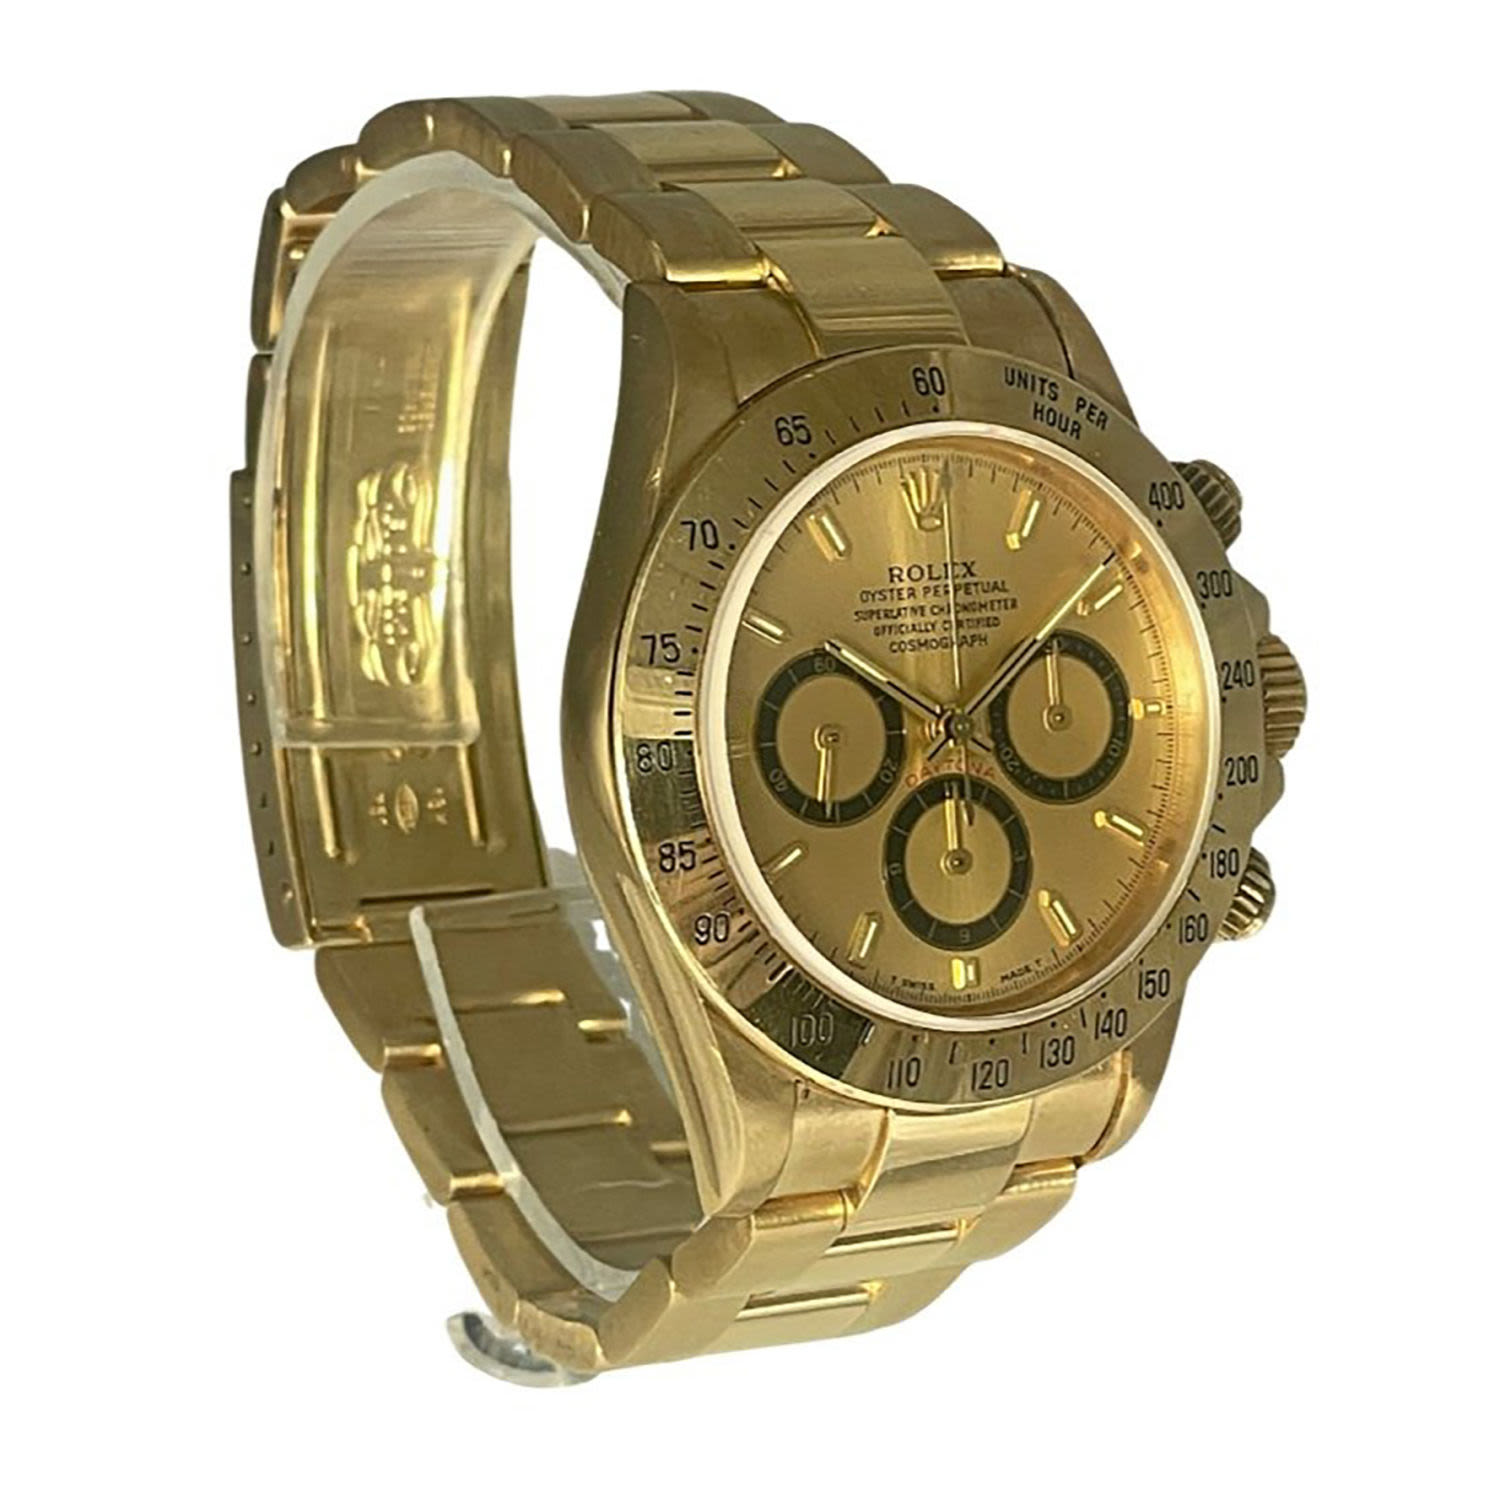 Exceptional Rolex Daytona "inverted 6" wristwatch in 18k solid gold. Brand new Rolex model 16528 - Image 2 of 9